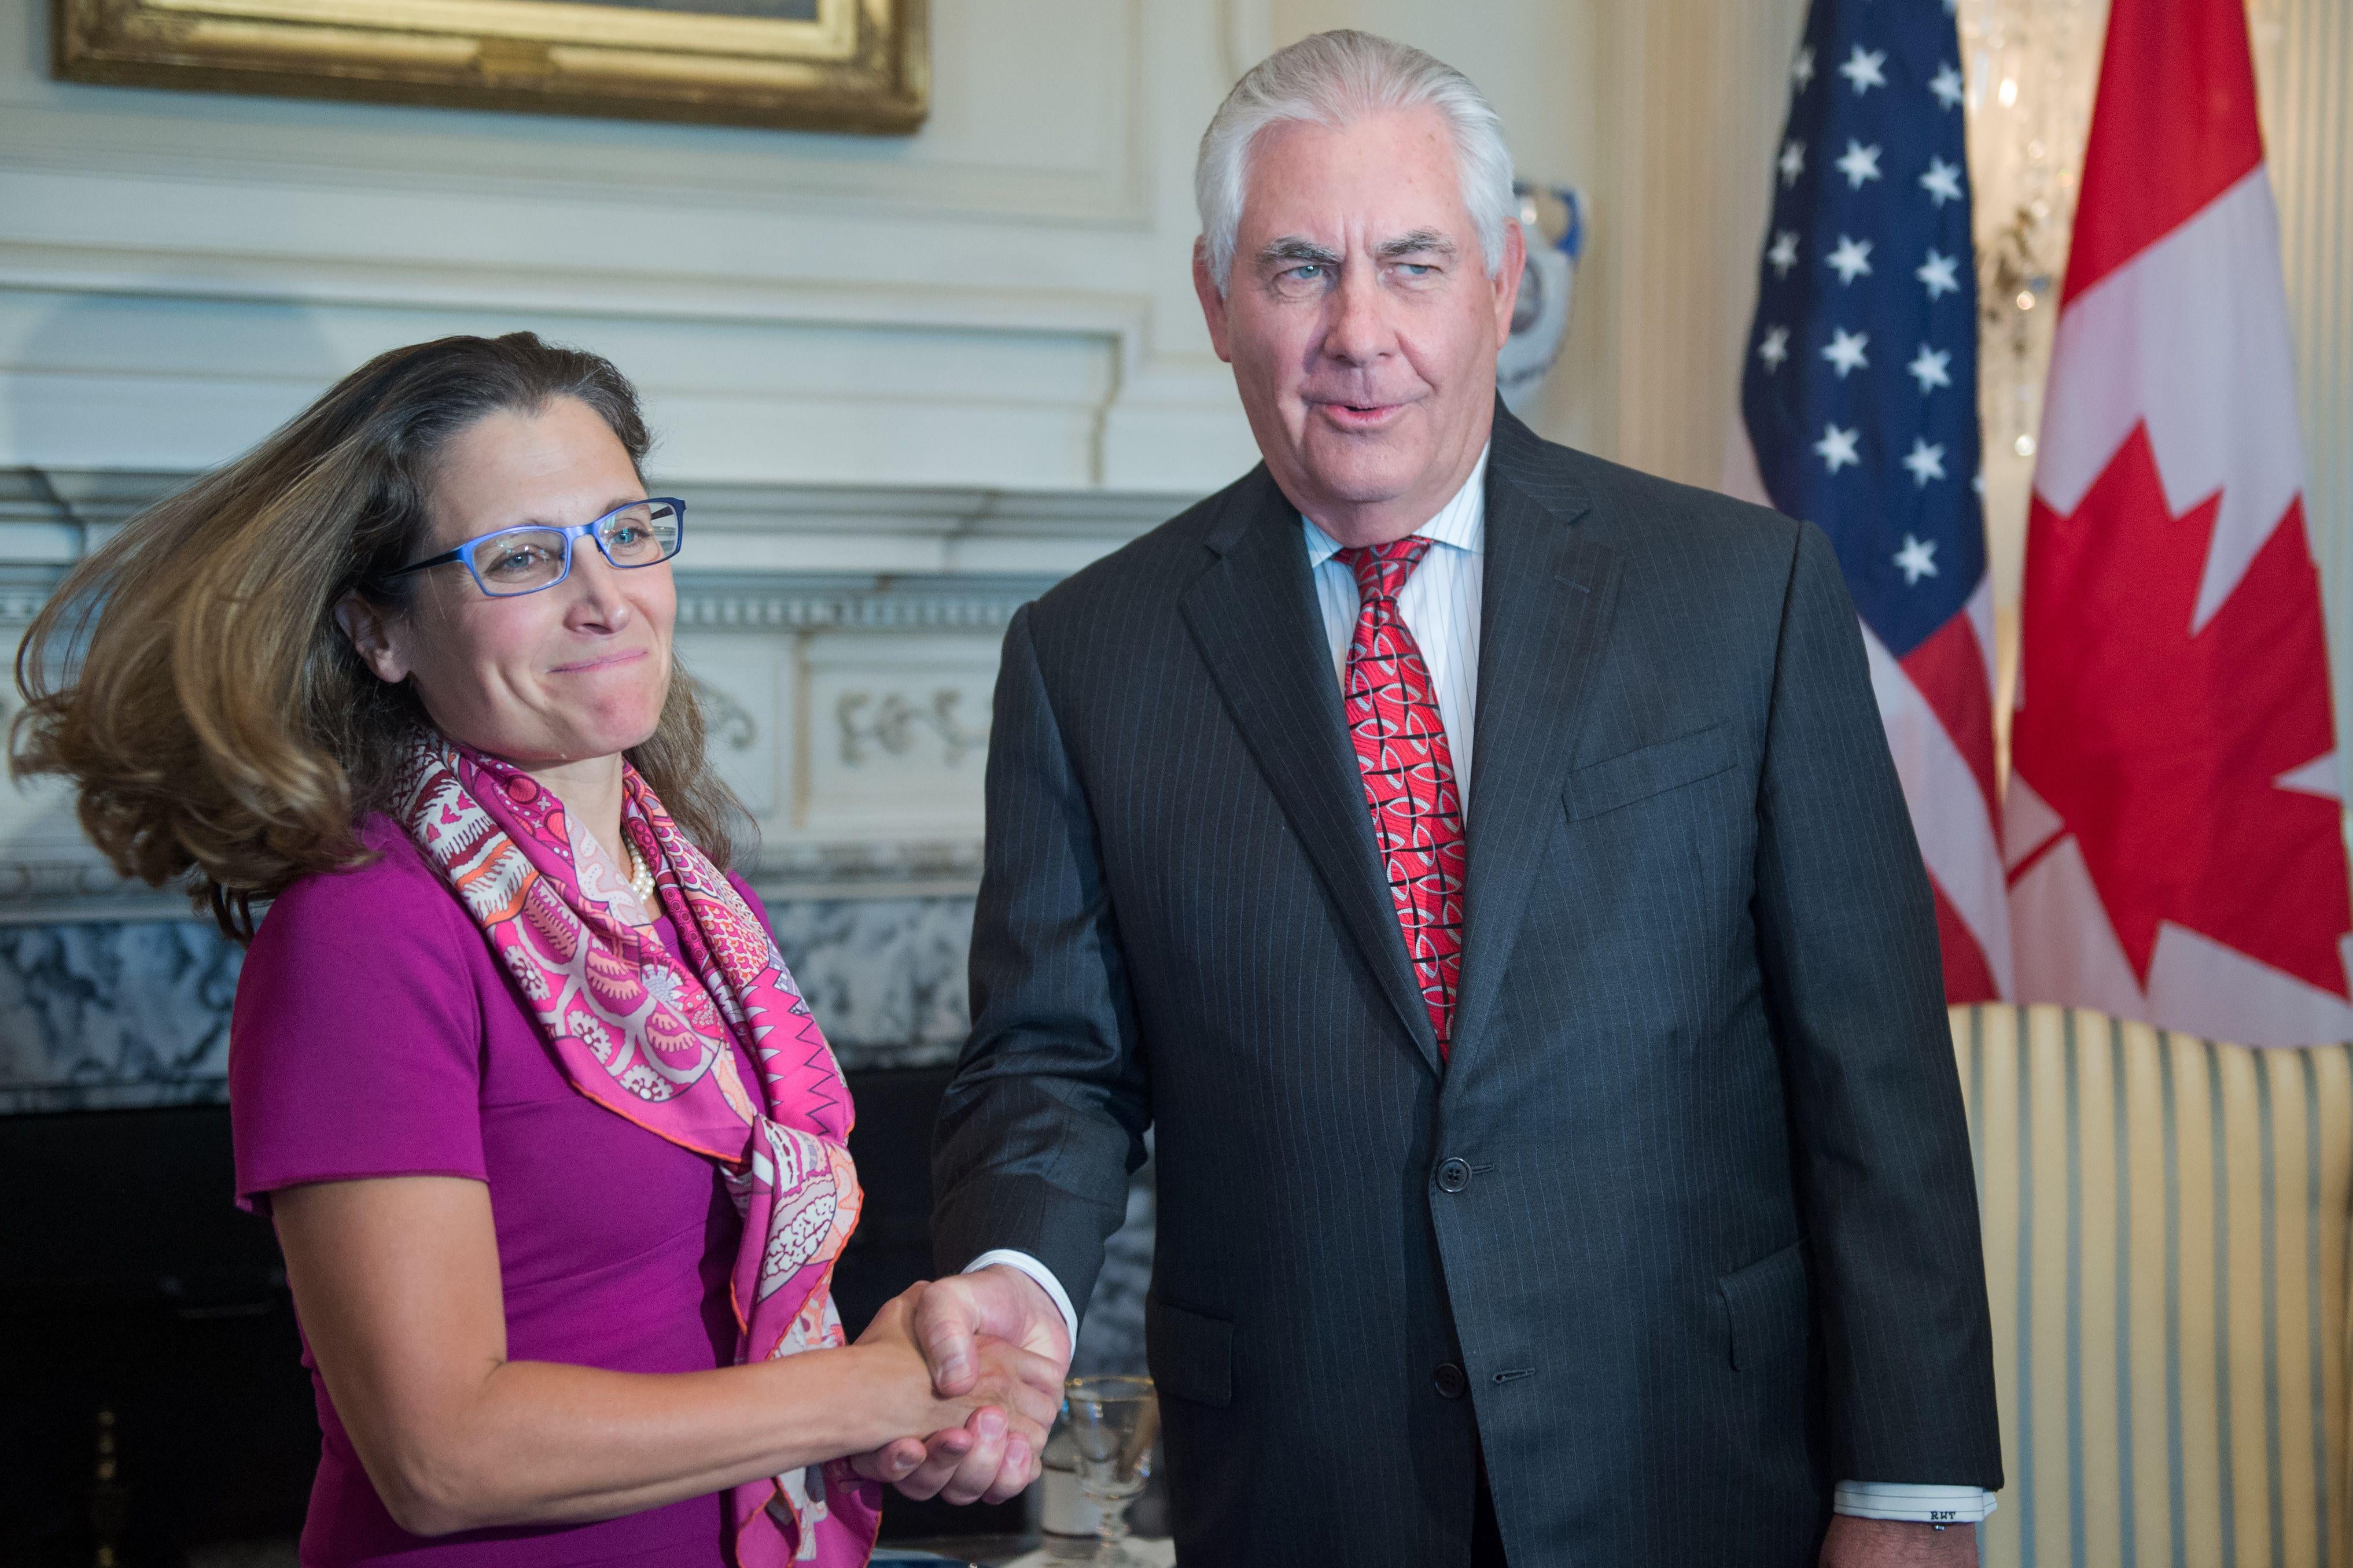 Canadian Minister of Foreign Affairs Chrystia Freeland shakes hands with U.S. Secretary of State Rex Tillerson.